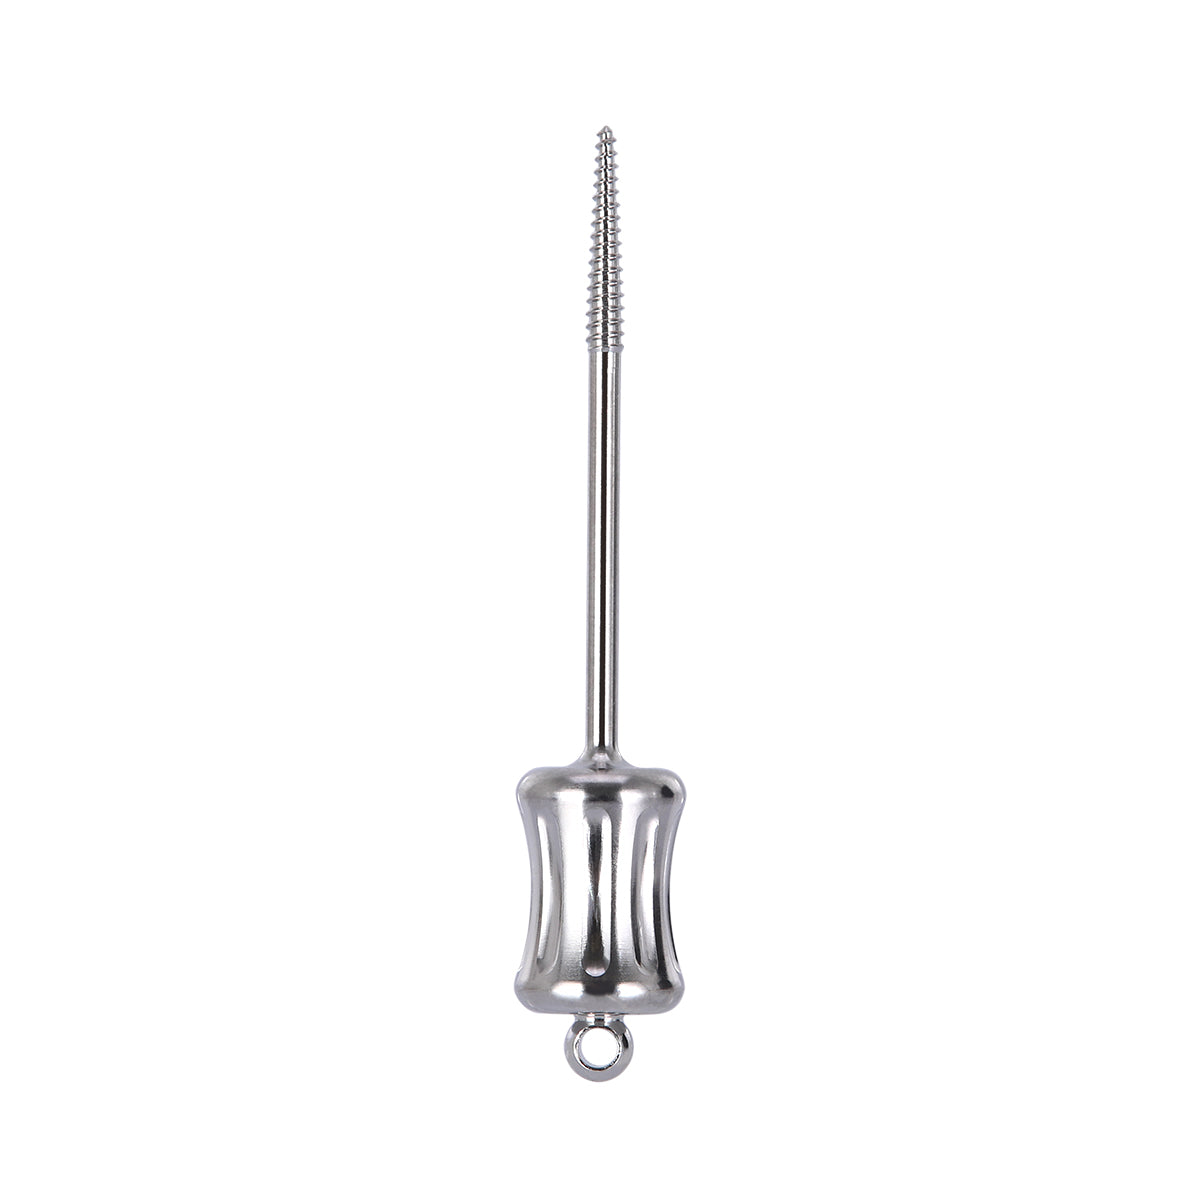 Dental Extractor Apical Root Fragments Drill Long 44.5mm - pairaydental.com